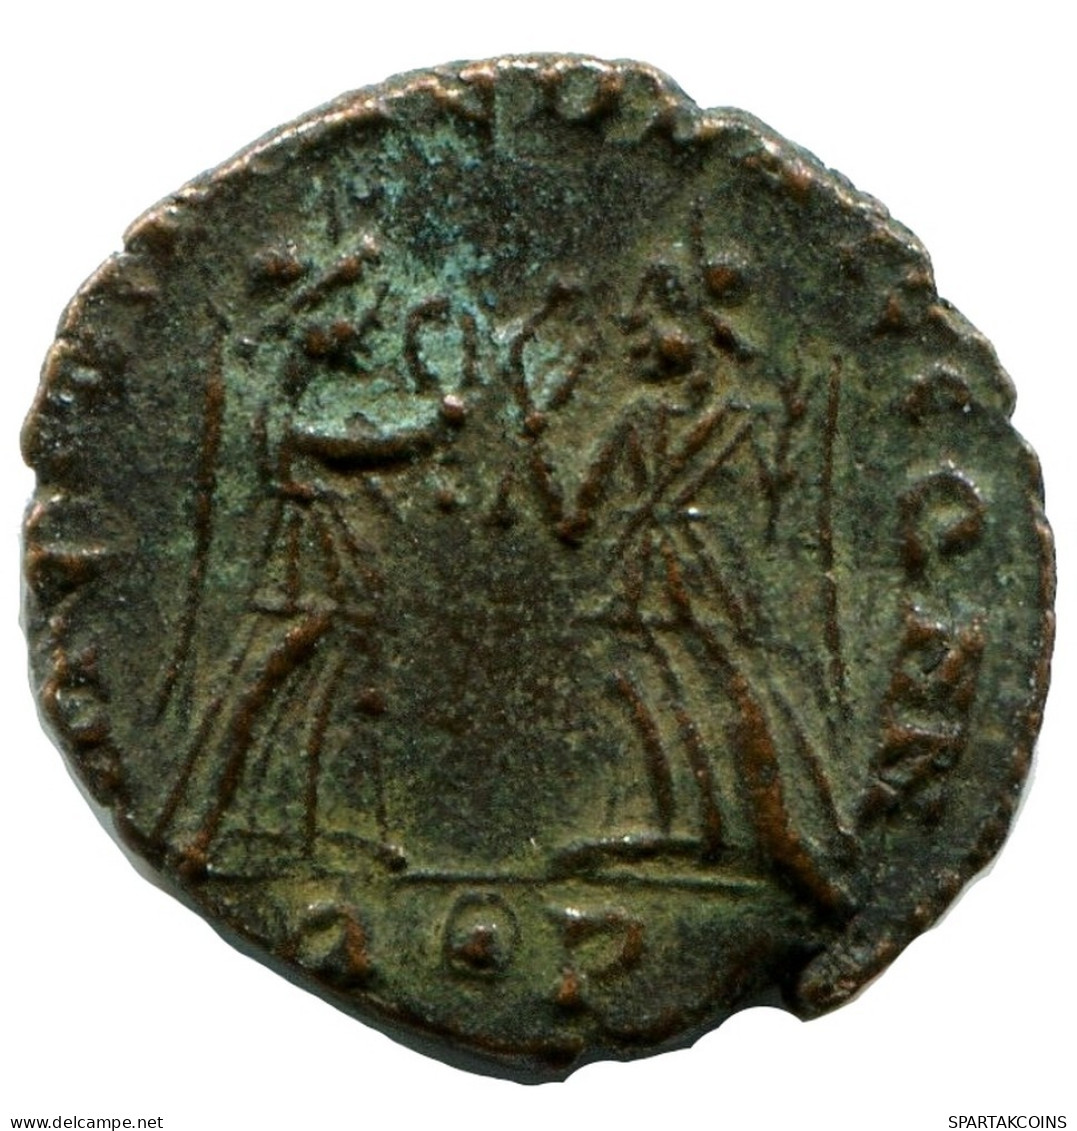 CONSTANS MINTED IN ROME ITALY FROM THE ROYAL ONTARIO MUSEUM #ANC11537.14.U.A - The Christian Empire (307 AD Tot 363 AD)